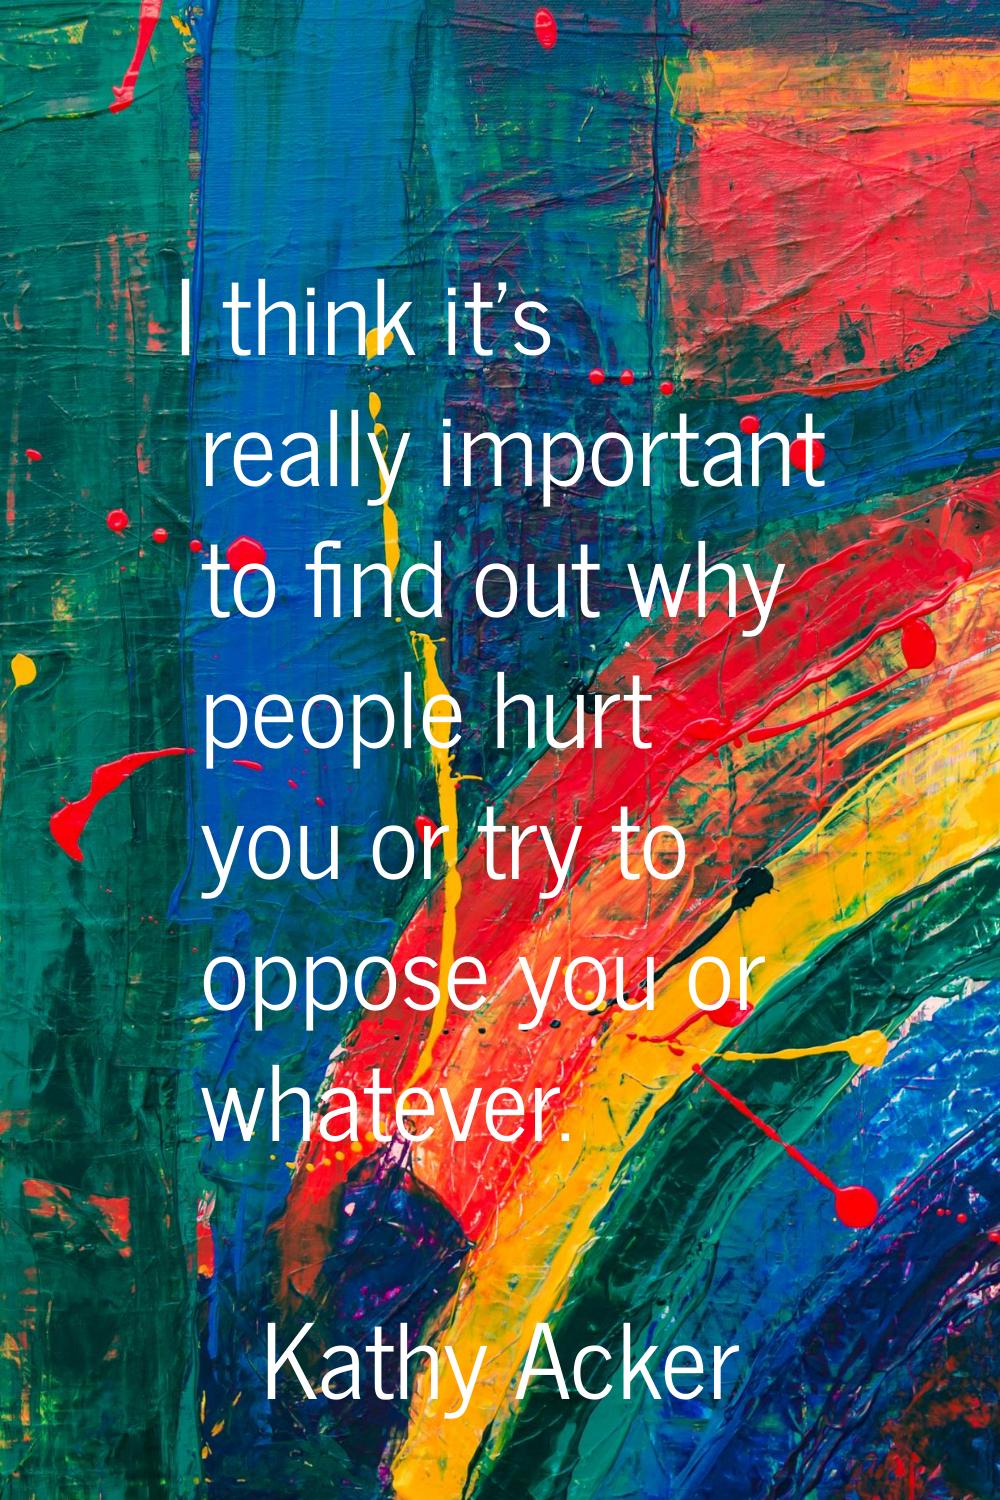 I think it's really important to find out why people hurt you or try to oppose you or whatever.